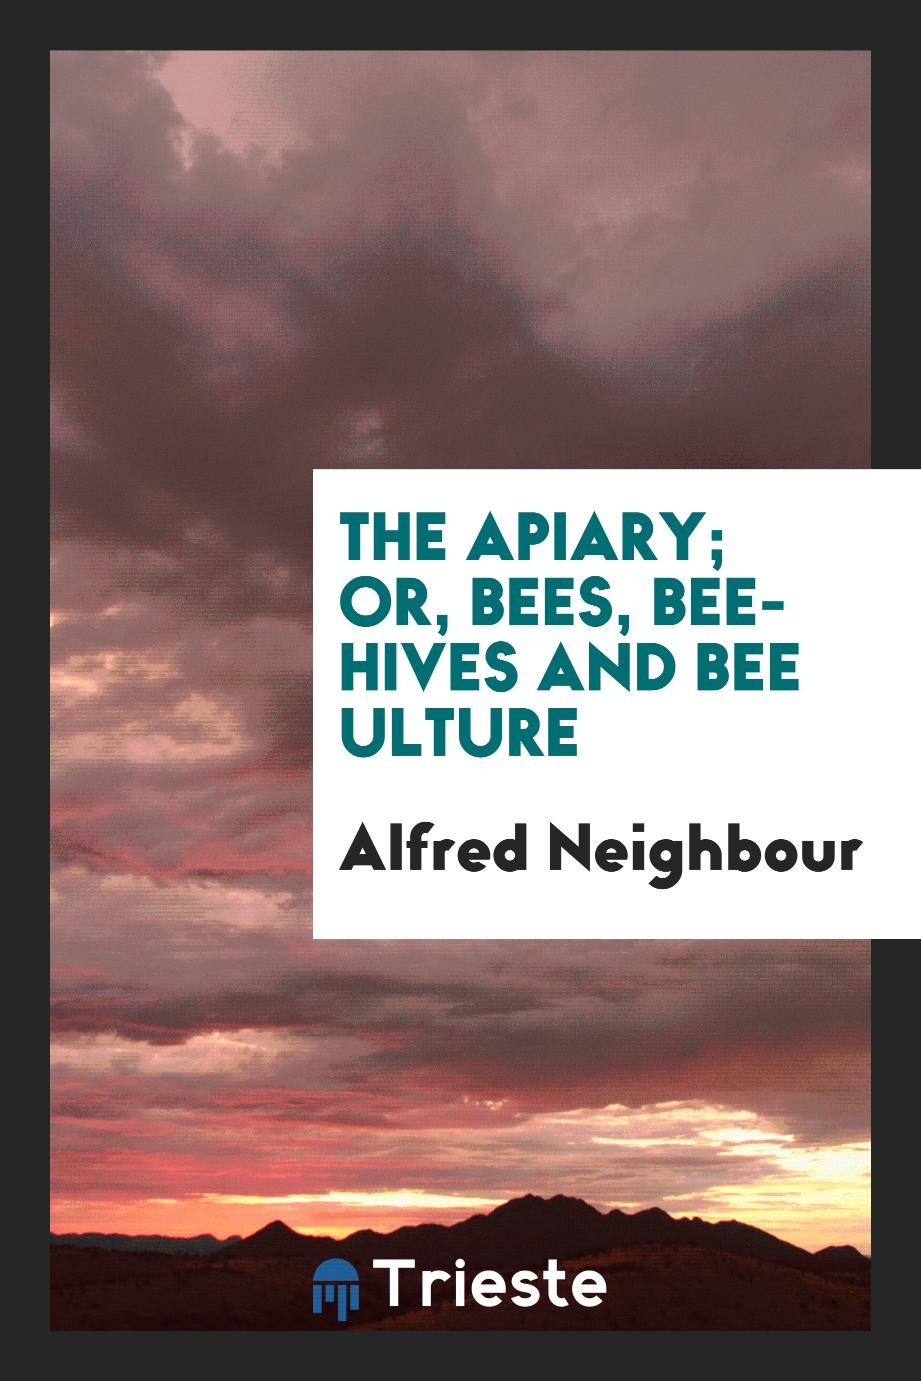 The Apiary; Or, Bees, Bee-Hives and Bee Сulture